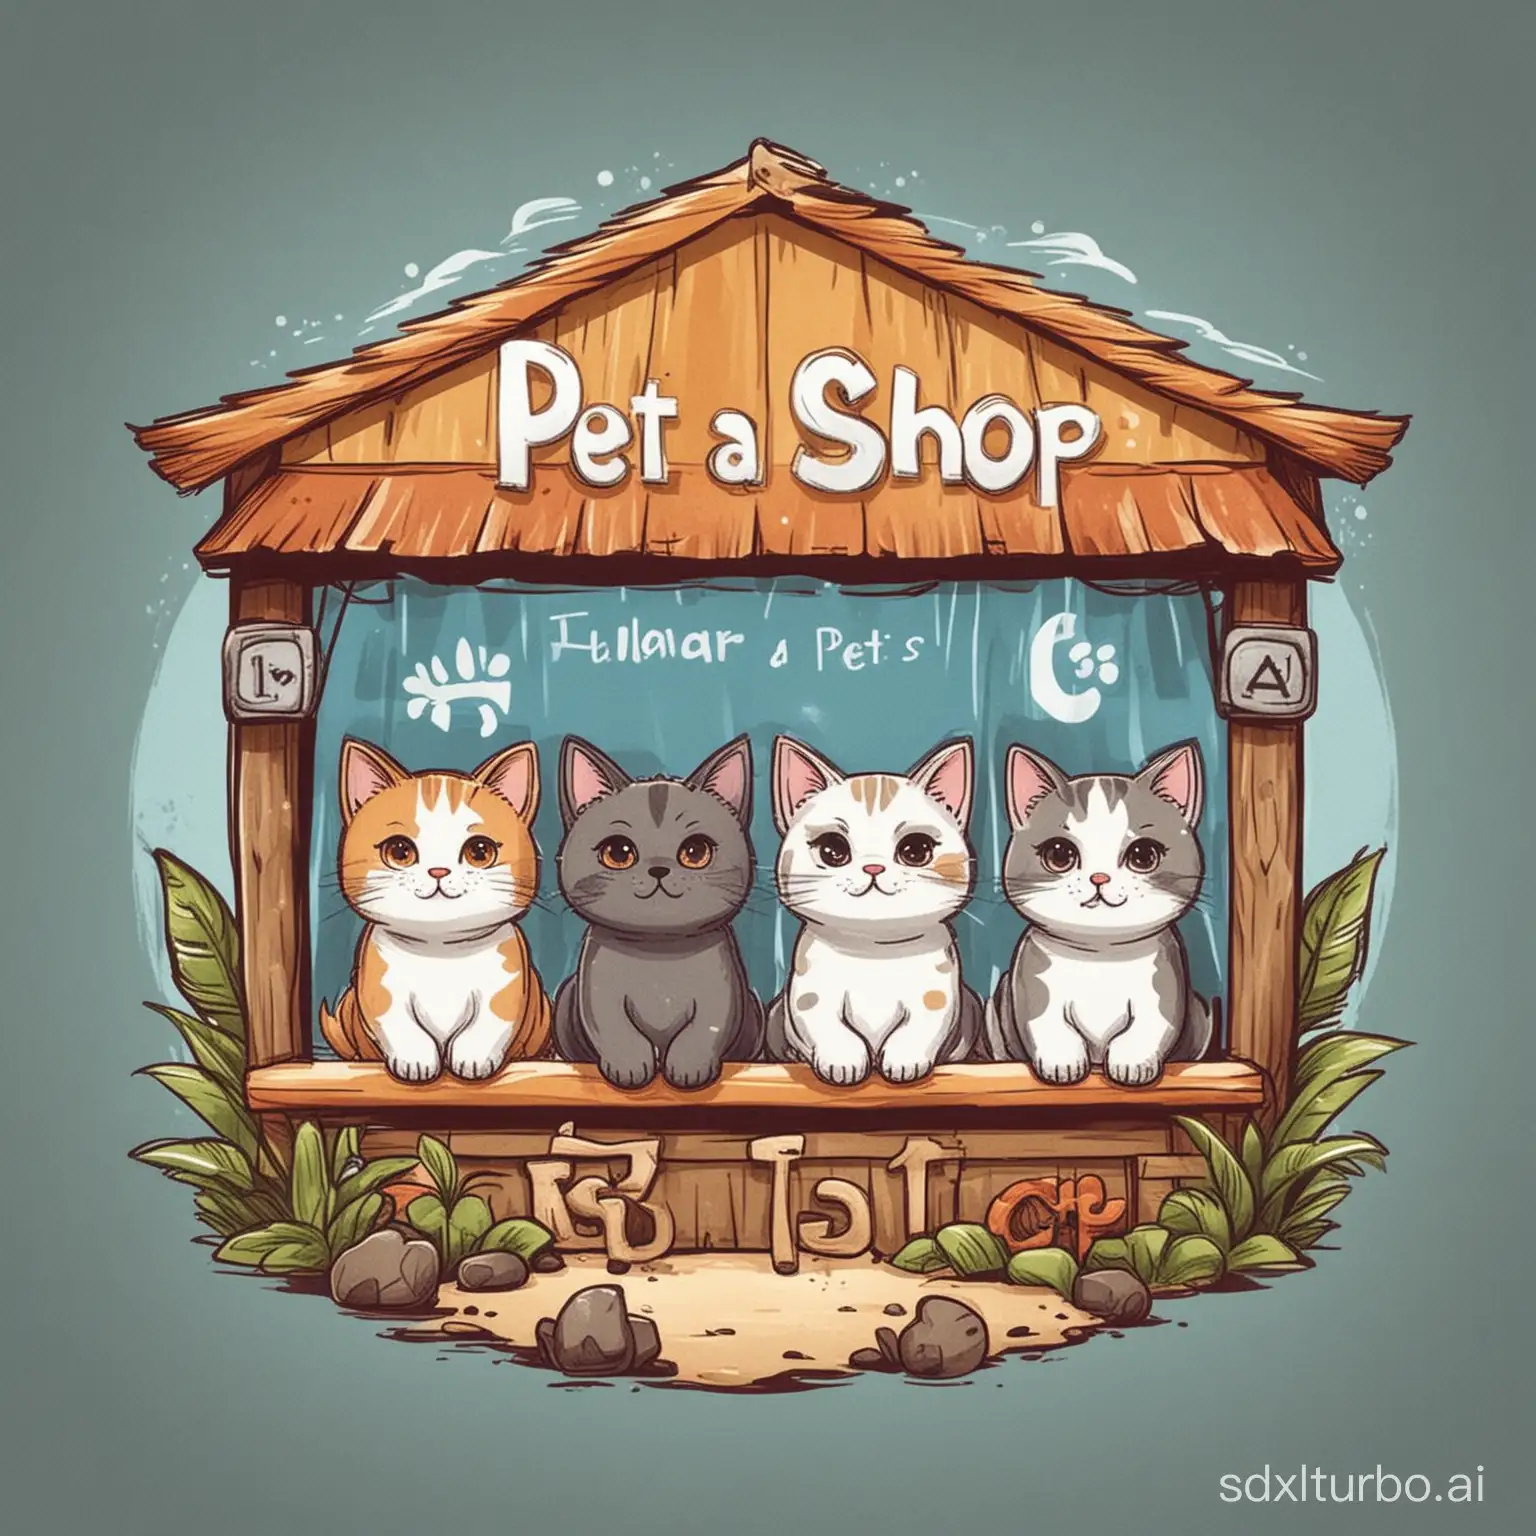 Draw a pet shop. The logo of the pet shop is an island with three cute cats and dogs on it